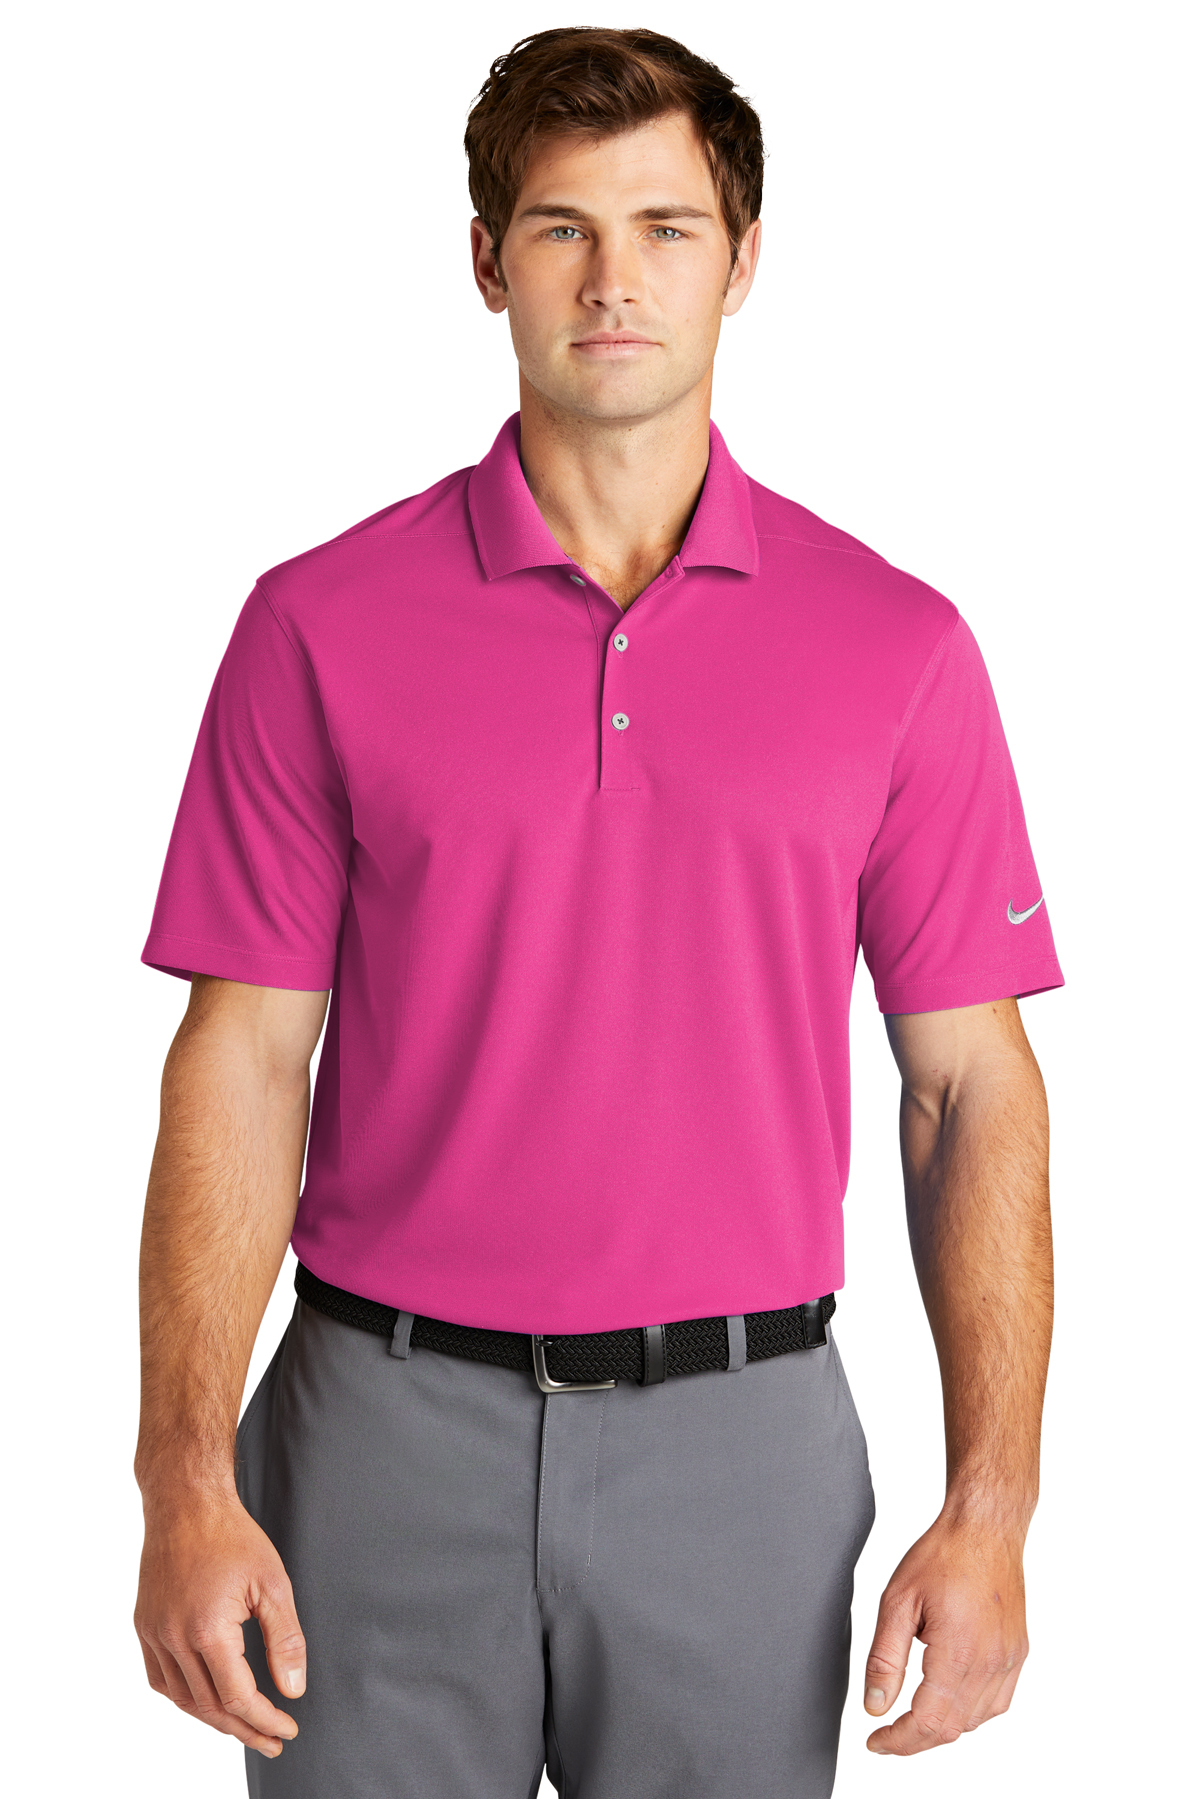 bow Dismantle at home Nike Dri-FIT Micro Pique 2.0 Polo | Product | SanMar